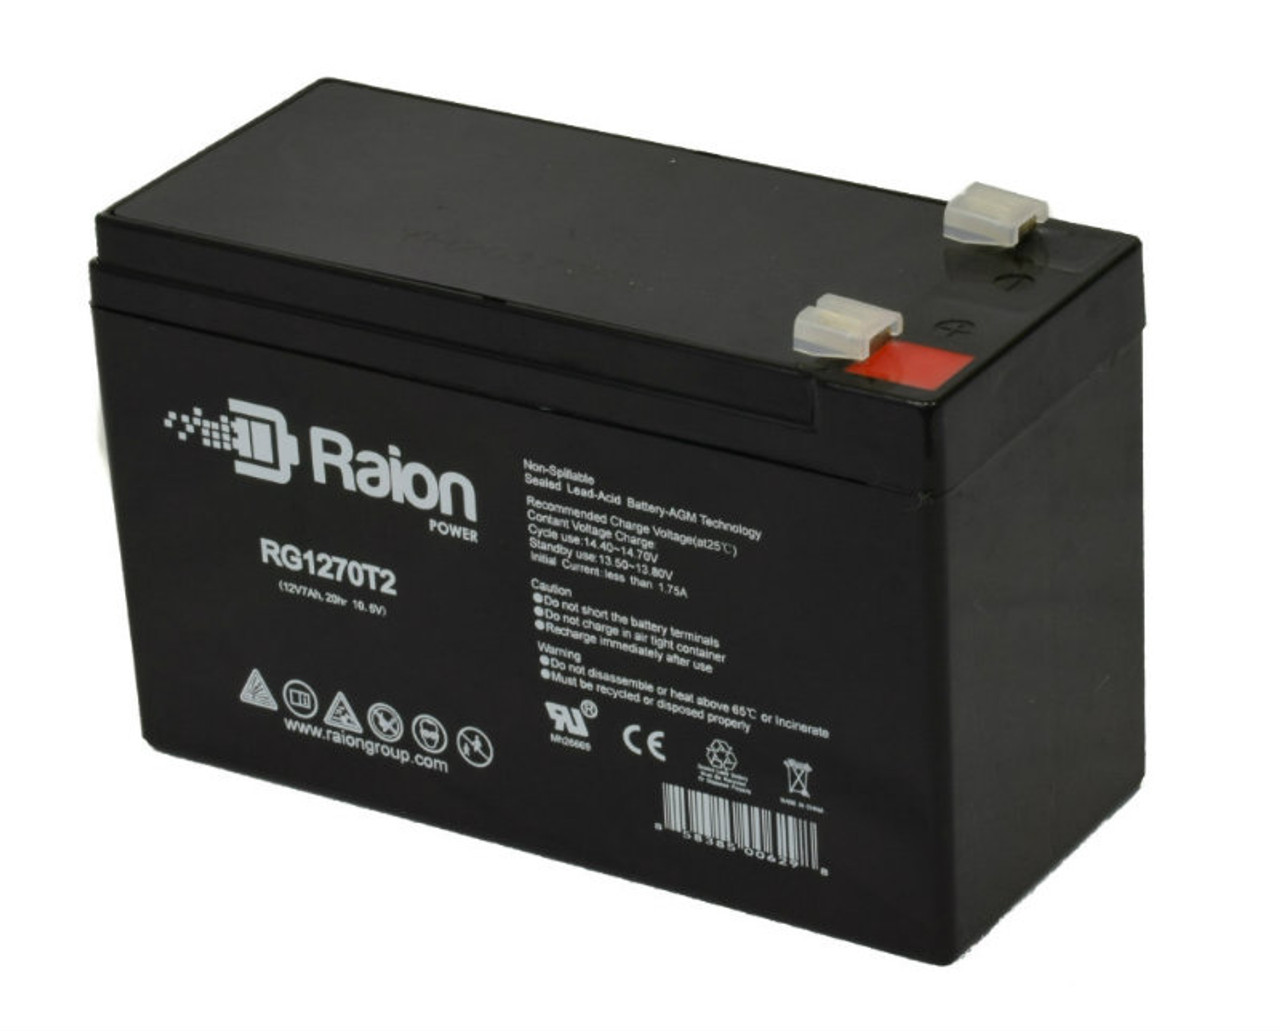 Raion Power RG1270T1 12V 7Ah Non-Spillable Replacement Battery for Medtronic 550 Blood Pump